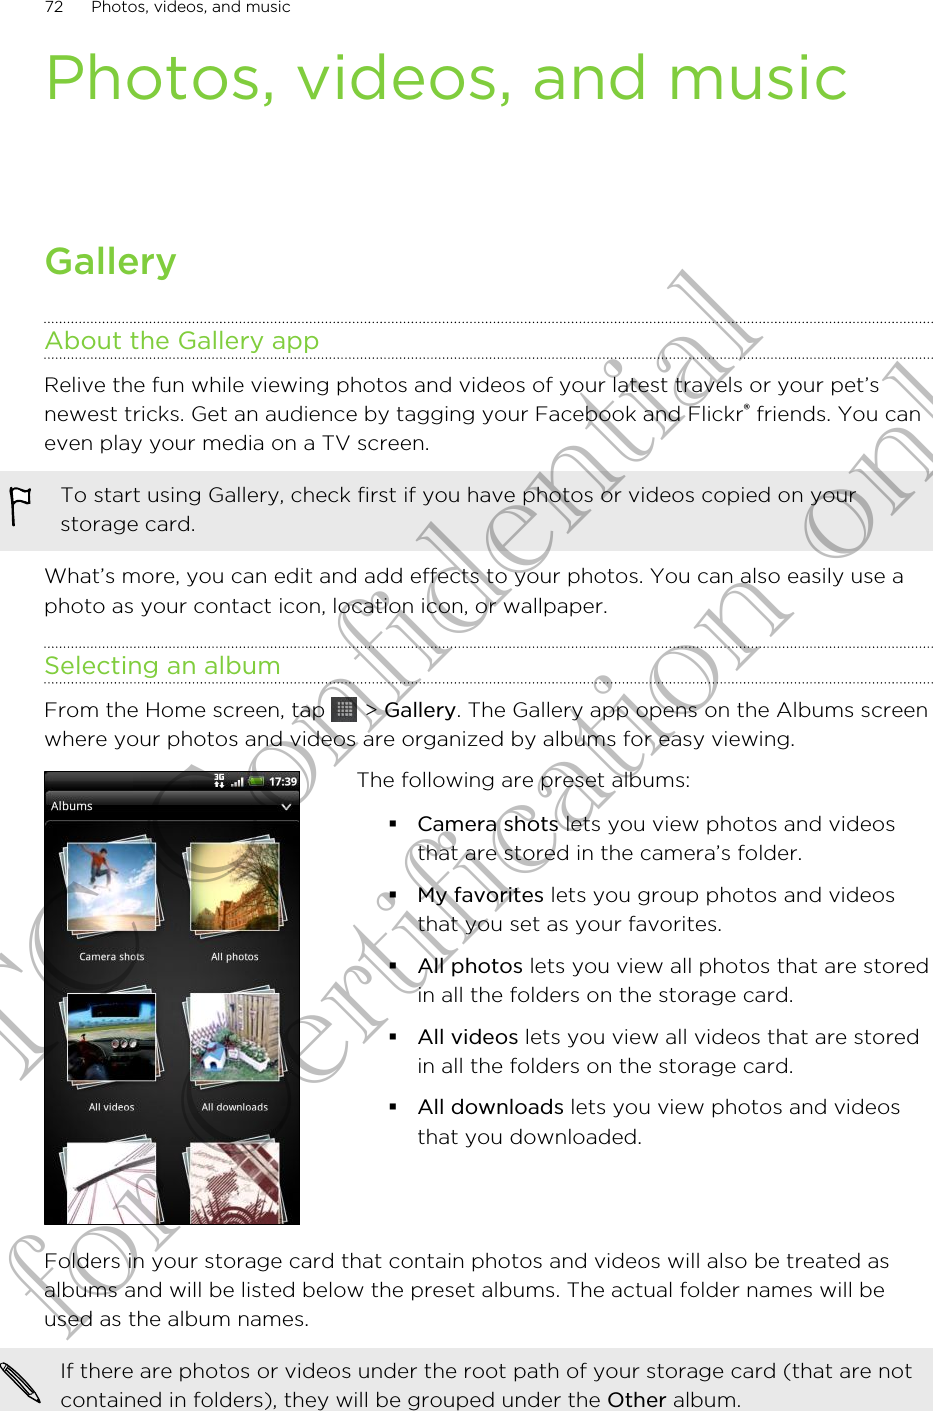 Photos, videos, and musicGalleryAbout the Gallery appRelive the fun while viewing photos and videos of your latest travels or your pet’snewest tricks. Get an audience by tagging your Facebook and Flickr® friends. You caneven play your media on a TV screen.To start using Gallery, check first if you have photos or videos copied on yourstorage card.What’s more, you can edit and add effects to your photos. You can also easily use aphoto as your contact icon, location icon, or wallpaper.Selecting an albumFrom the Home screen, tap   &gt; Gallery. The Gallery app opens on the Albums screenwhere your photos and videos are organized by albums for easy viewing.The following are preset albums:§Camera shots lets you view photos and videosthat are stored in the camera’s folder.§My favorites lets you group photos and videosthat you set as your favorites.§All photos lets you view all photos that are storedin all the folders on the storage card.§All videos lets you view all videos that are storedin all the folders on the storage card.§All downloads lets you view photos and videosthat you downloaded.Folders in your storage card that contain photos and videos will also be treated asalbums and will be listed below the preset albums. The actual folder names will beused as the album names.If there are photos or videos under the root path of your storage card (that are notcontained in folders), they will be grouped under the Other album.72 Photos, videos, and musicHTC Confidential for Certification only